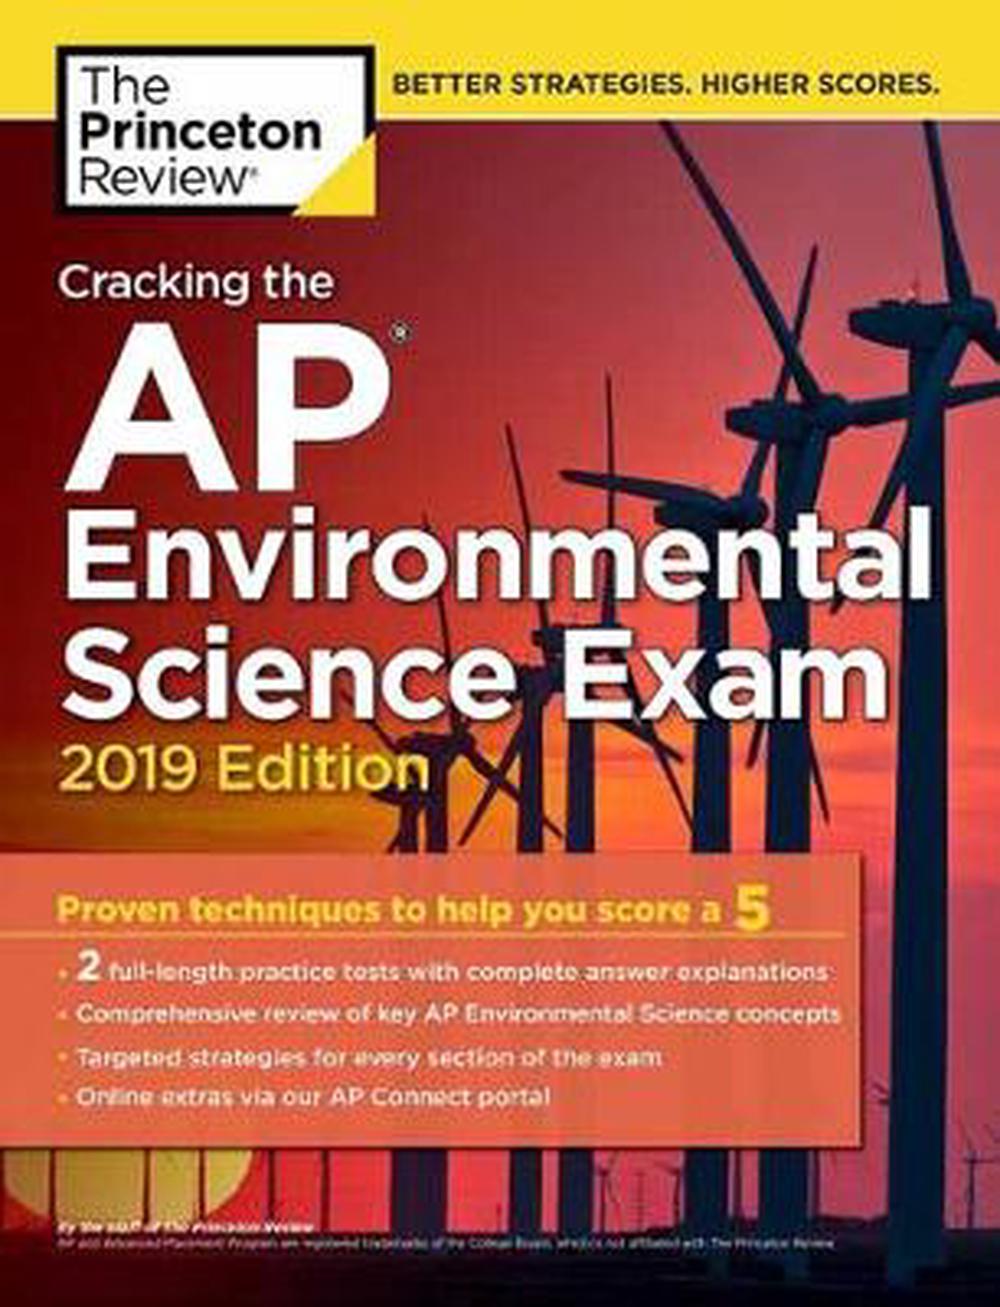 Cracking the AP Environmental Science Exam by Princeton Review